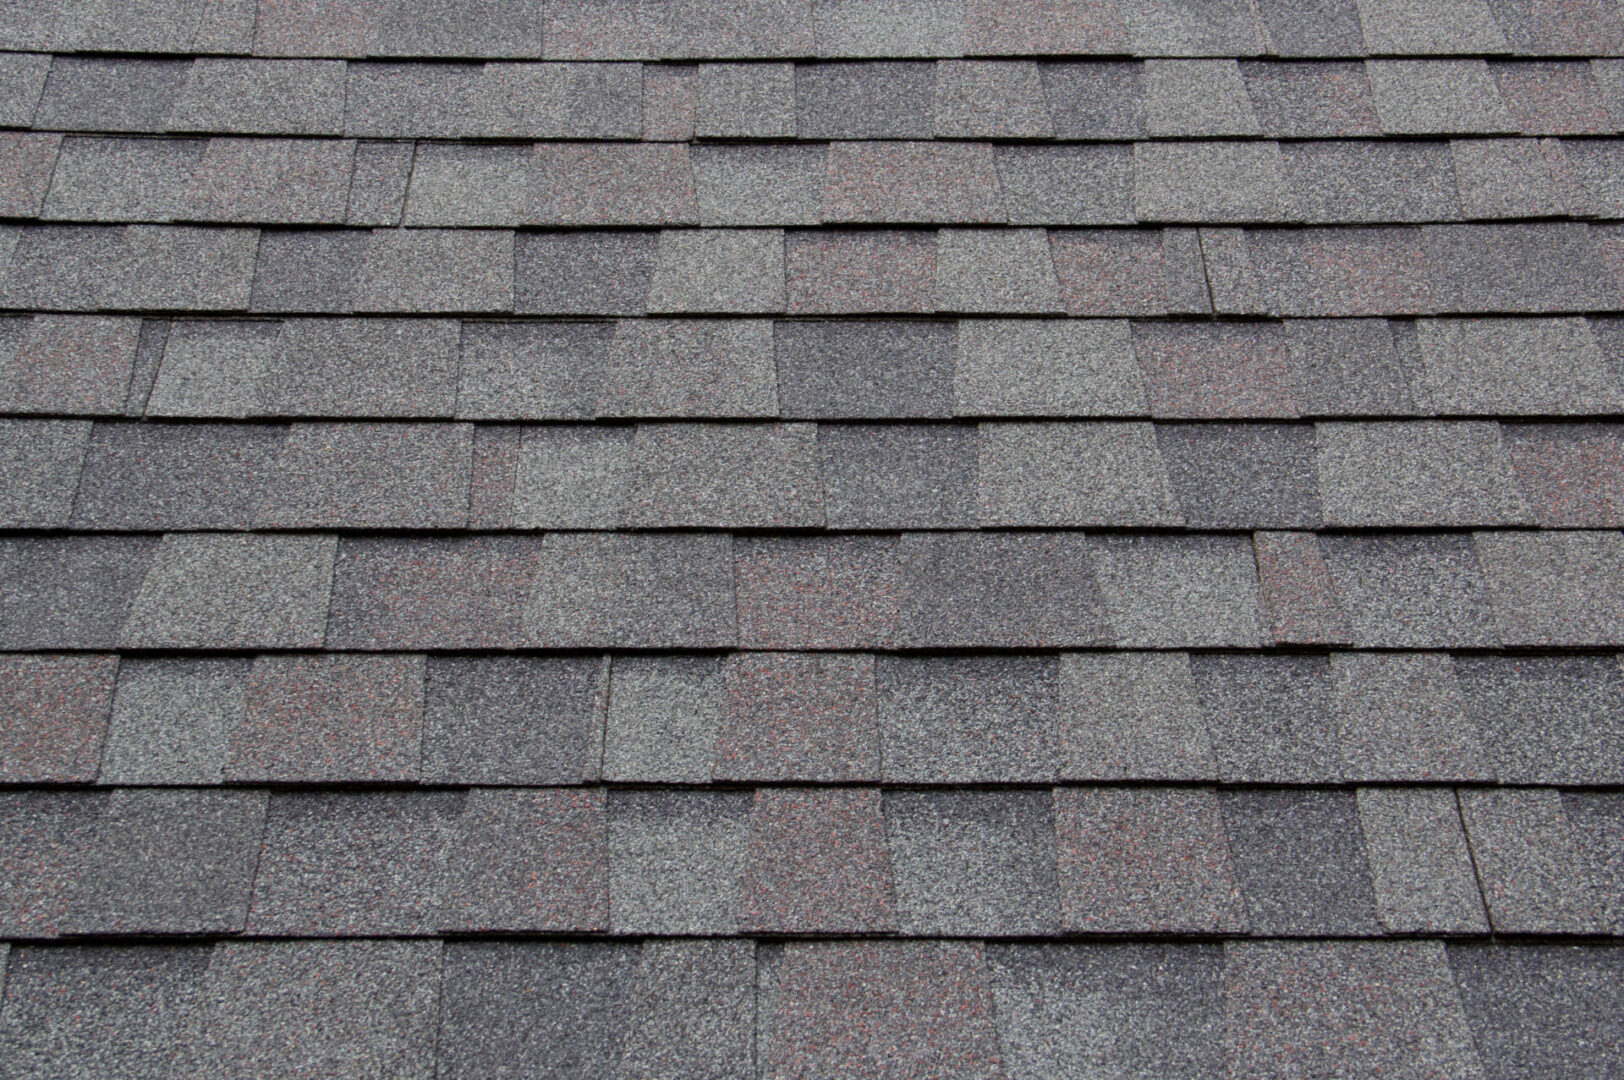 The recently repaired shingles on a business roof